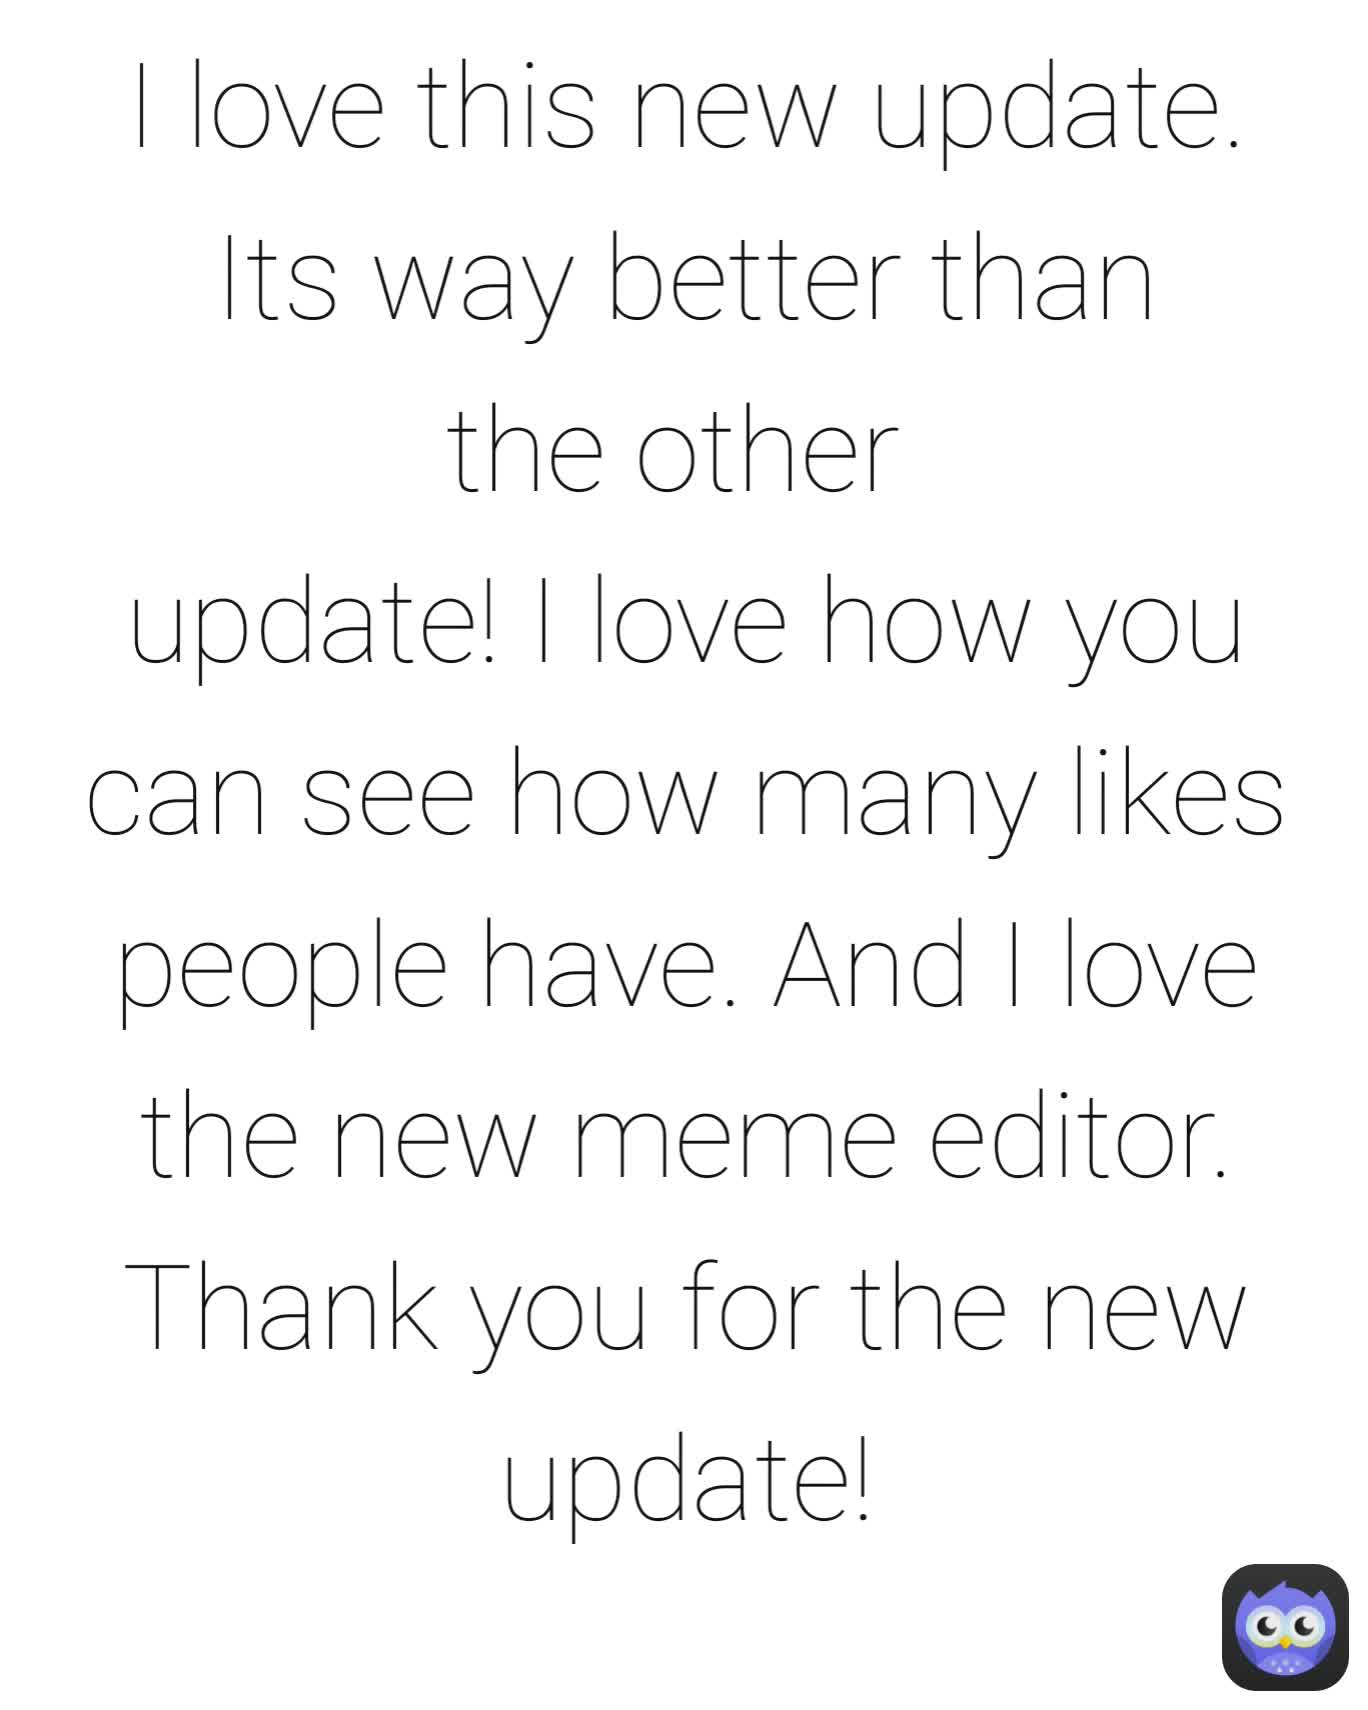 I love this new update.
Its way better than the other 
update! I love how you
can see how many likes people have. And I love the new meme editor. Thank you for the new update!